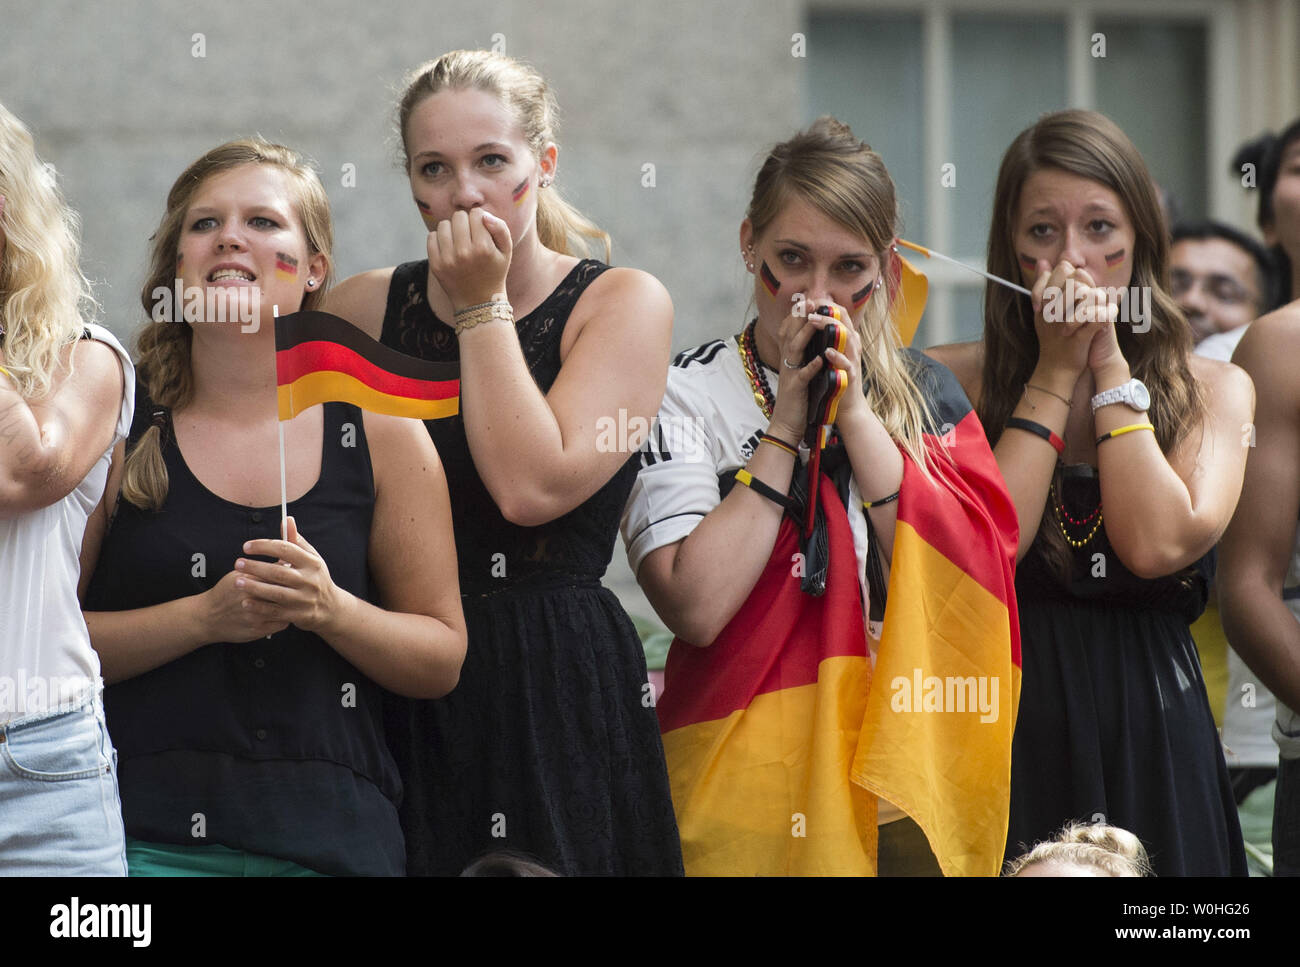 German fans react as they watch the 2014 World Cup final between Germany and Argentina during a watch party held at the Smithsonian Portrait Gallery, in Washington, D.C. on July 13, 2014.  UPI/Kevin Dietsch Stock Photo